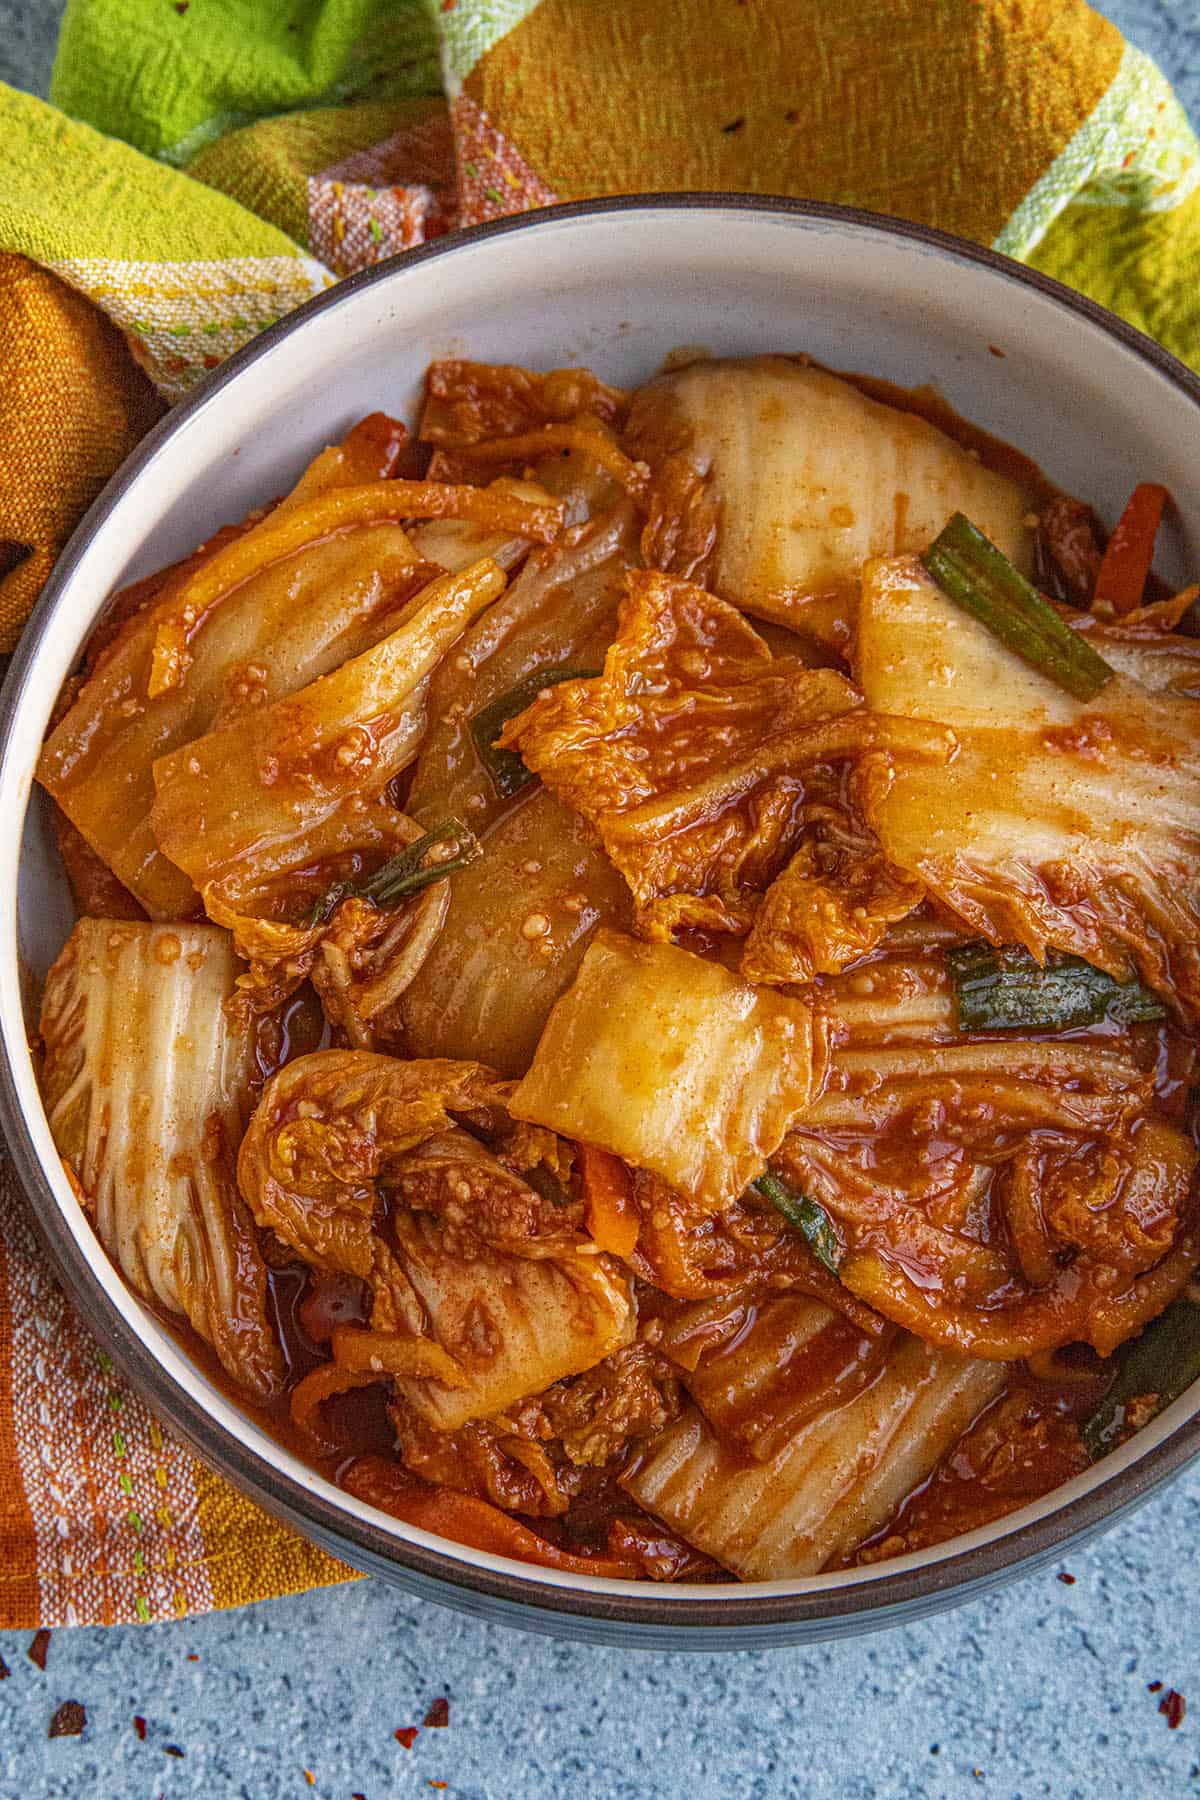 Spicy Kimchi in a bowl